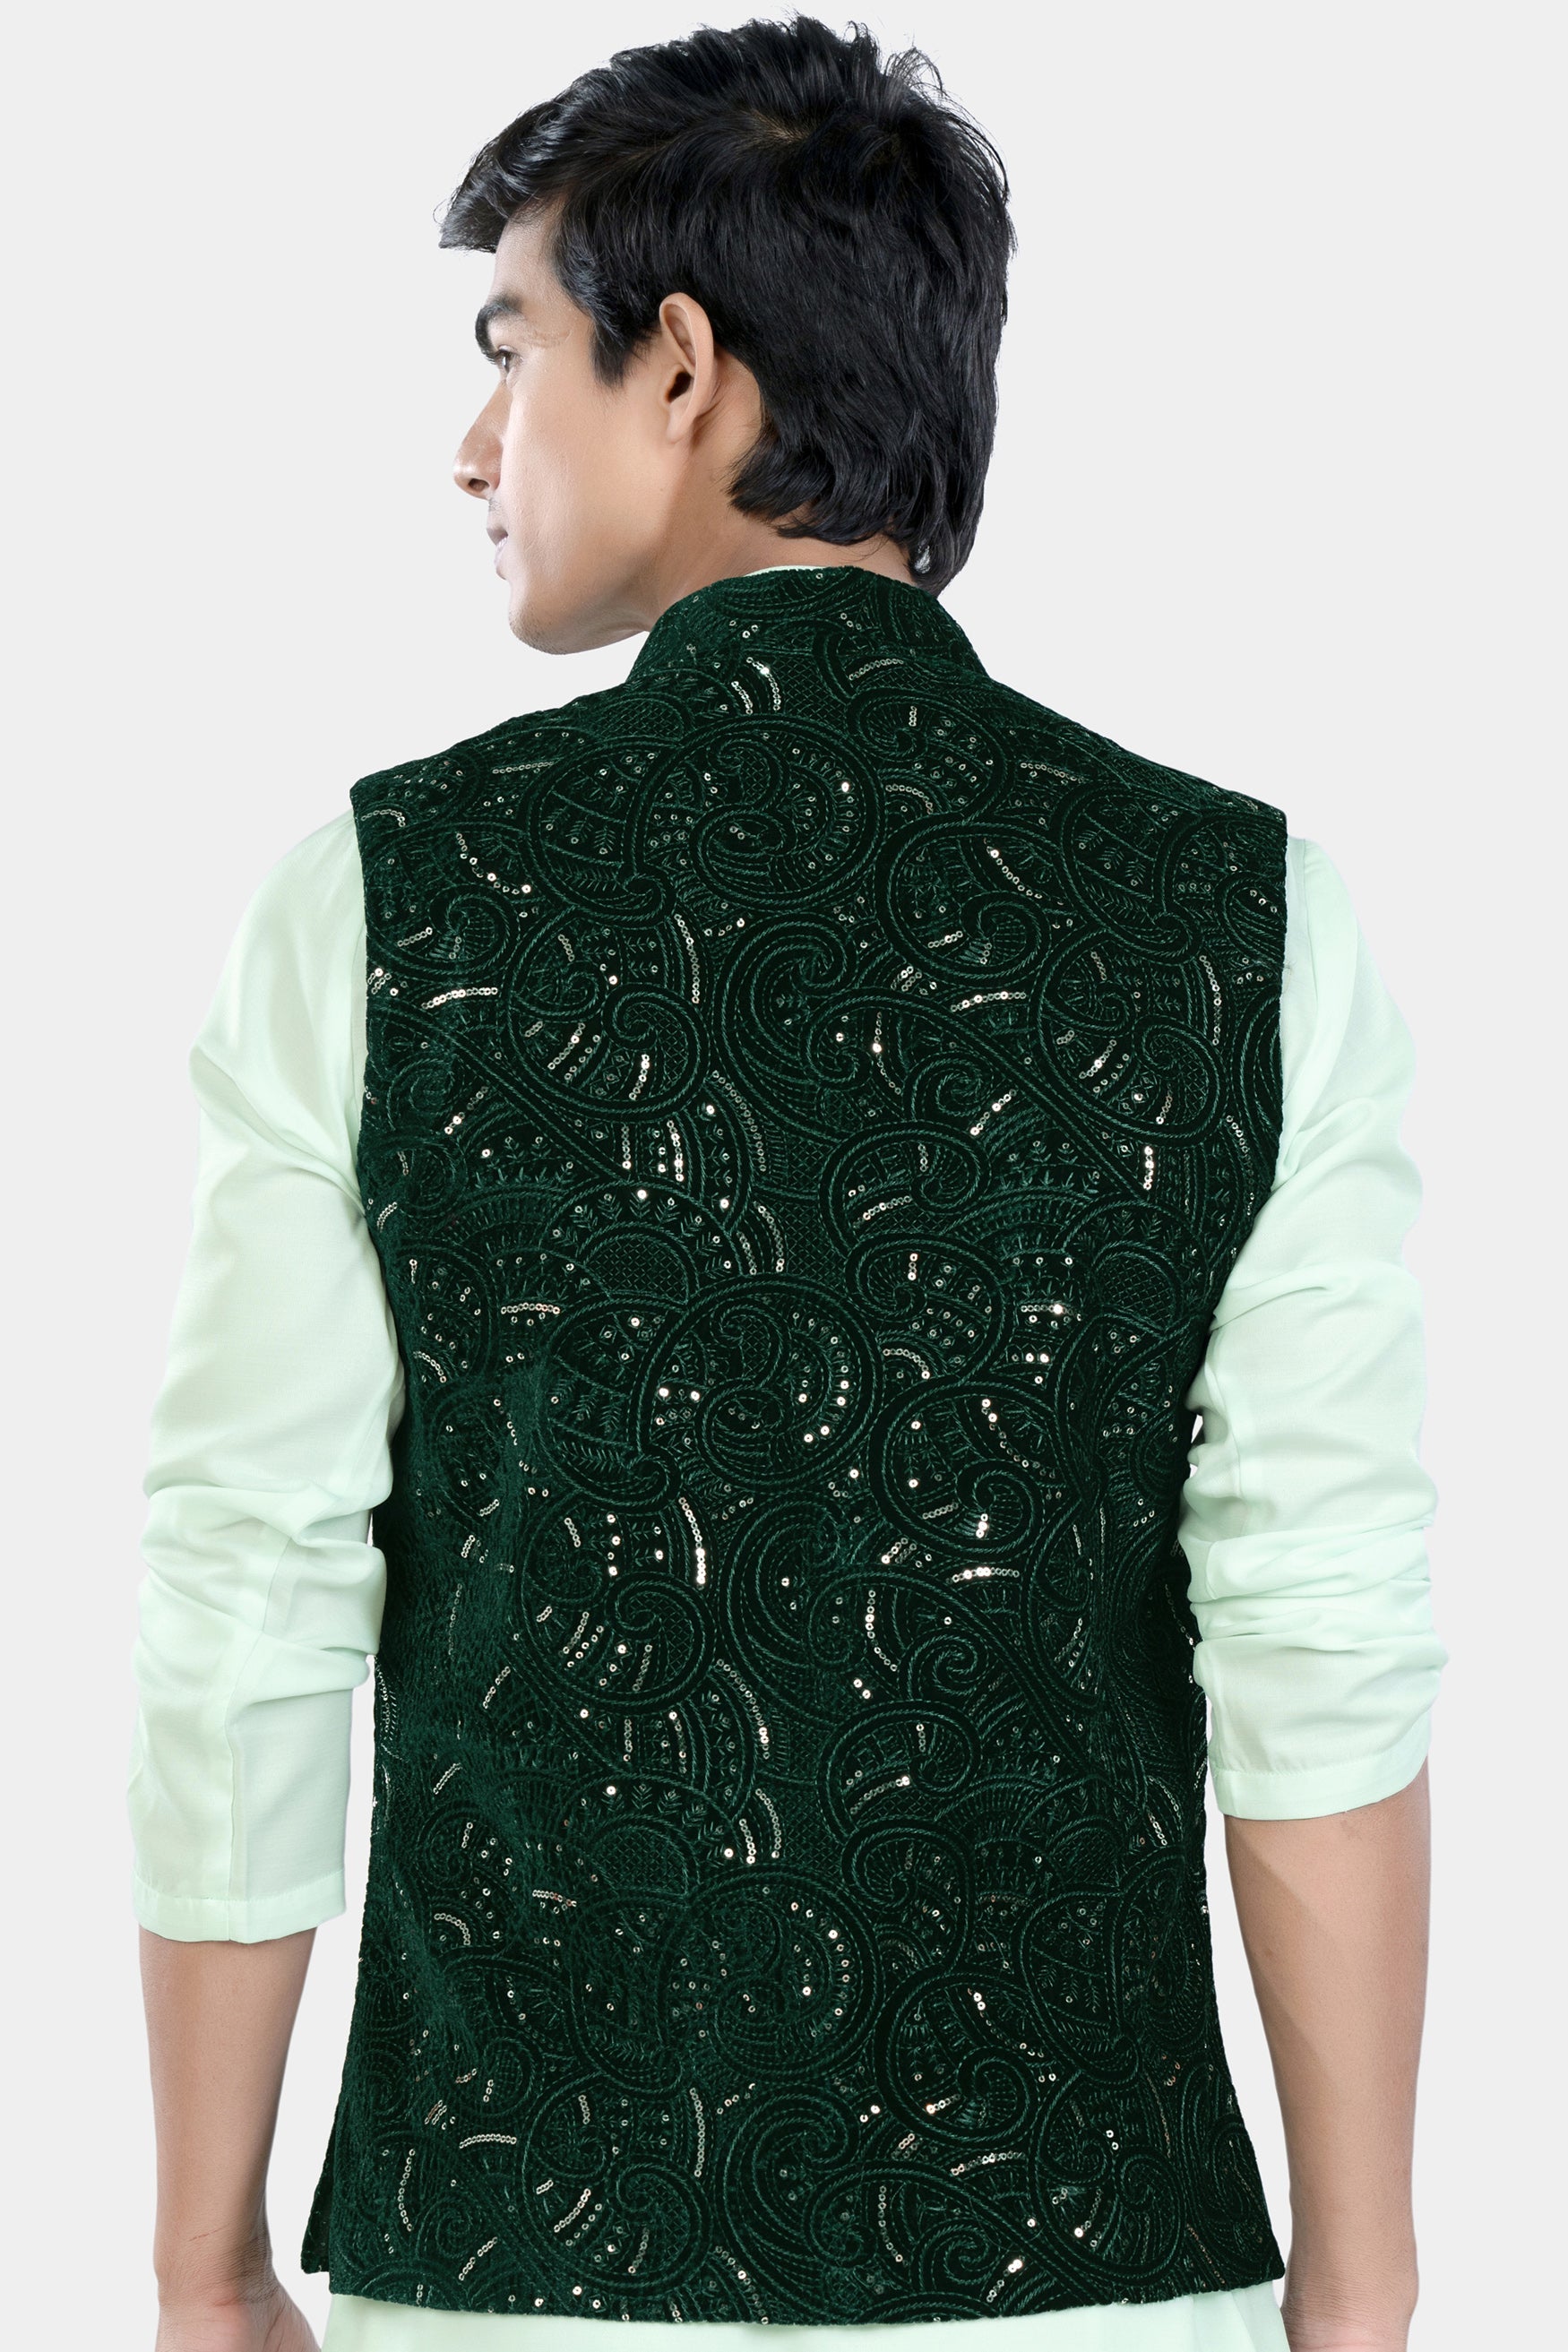 Palm and Jewel Green Sequin and Thread Embroidered Designer Nehru Jacket WC3457-36,  WC3457-38,  WC3457-40,  WC3457-42,  WC3457-44,  WC3457-46,  WC3457-48,  WC3457-50,  WC3457-52,  WC3457-54,  WC3457-56,  WC3457-58,  WC3457-60